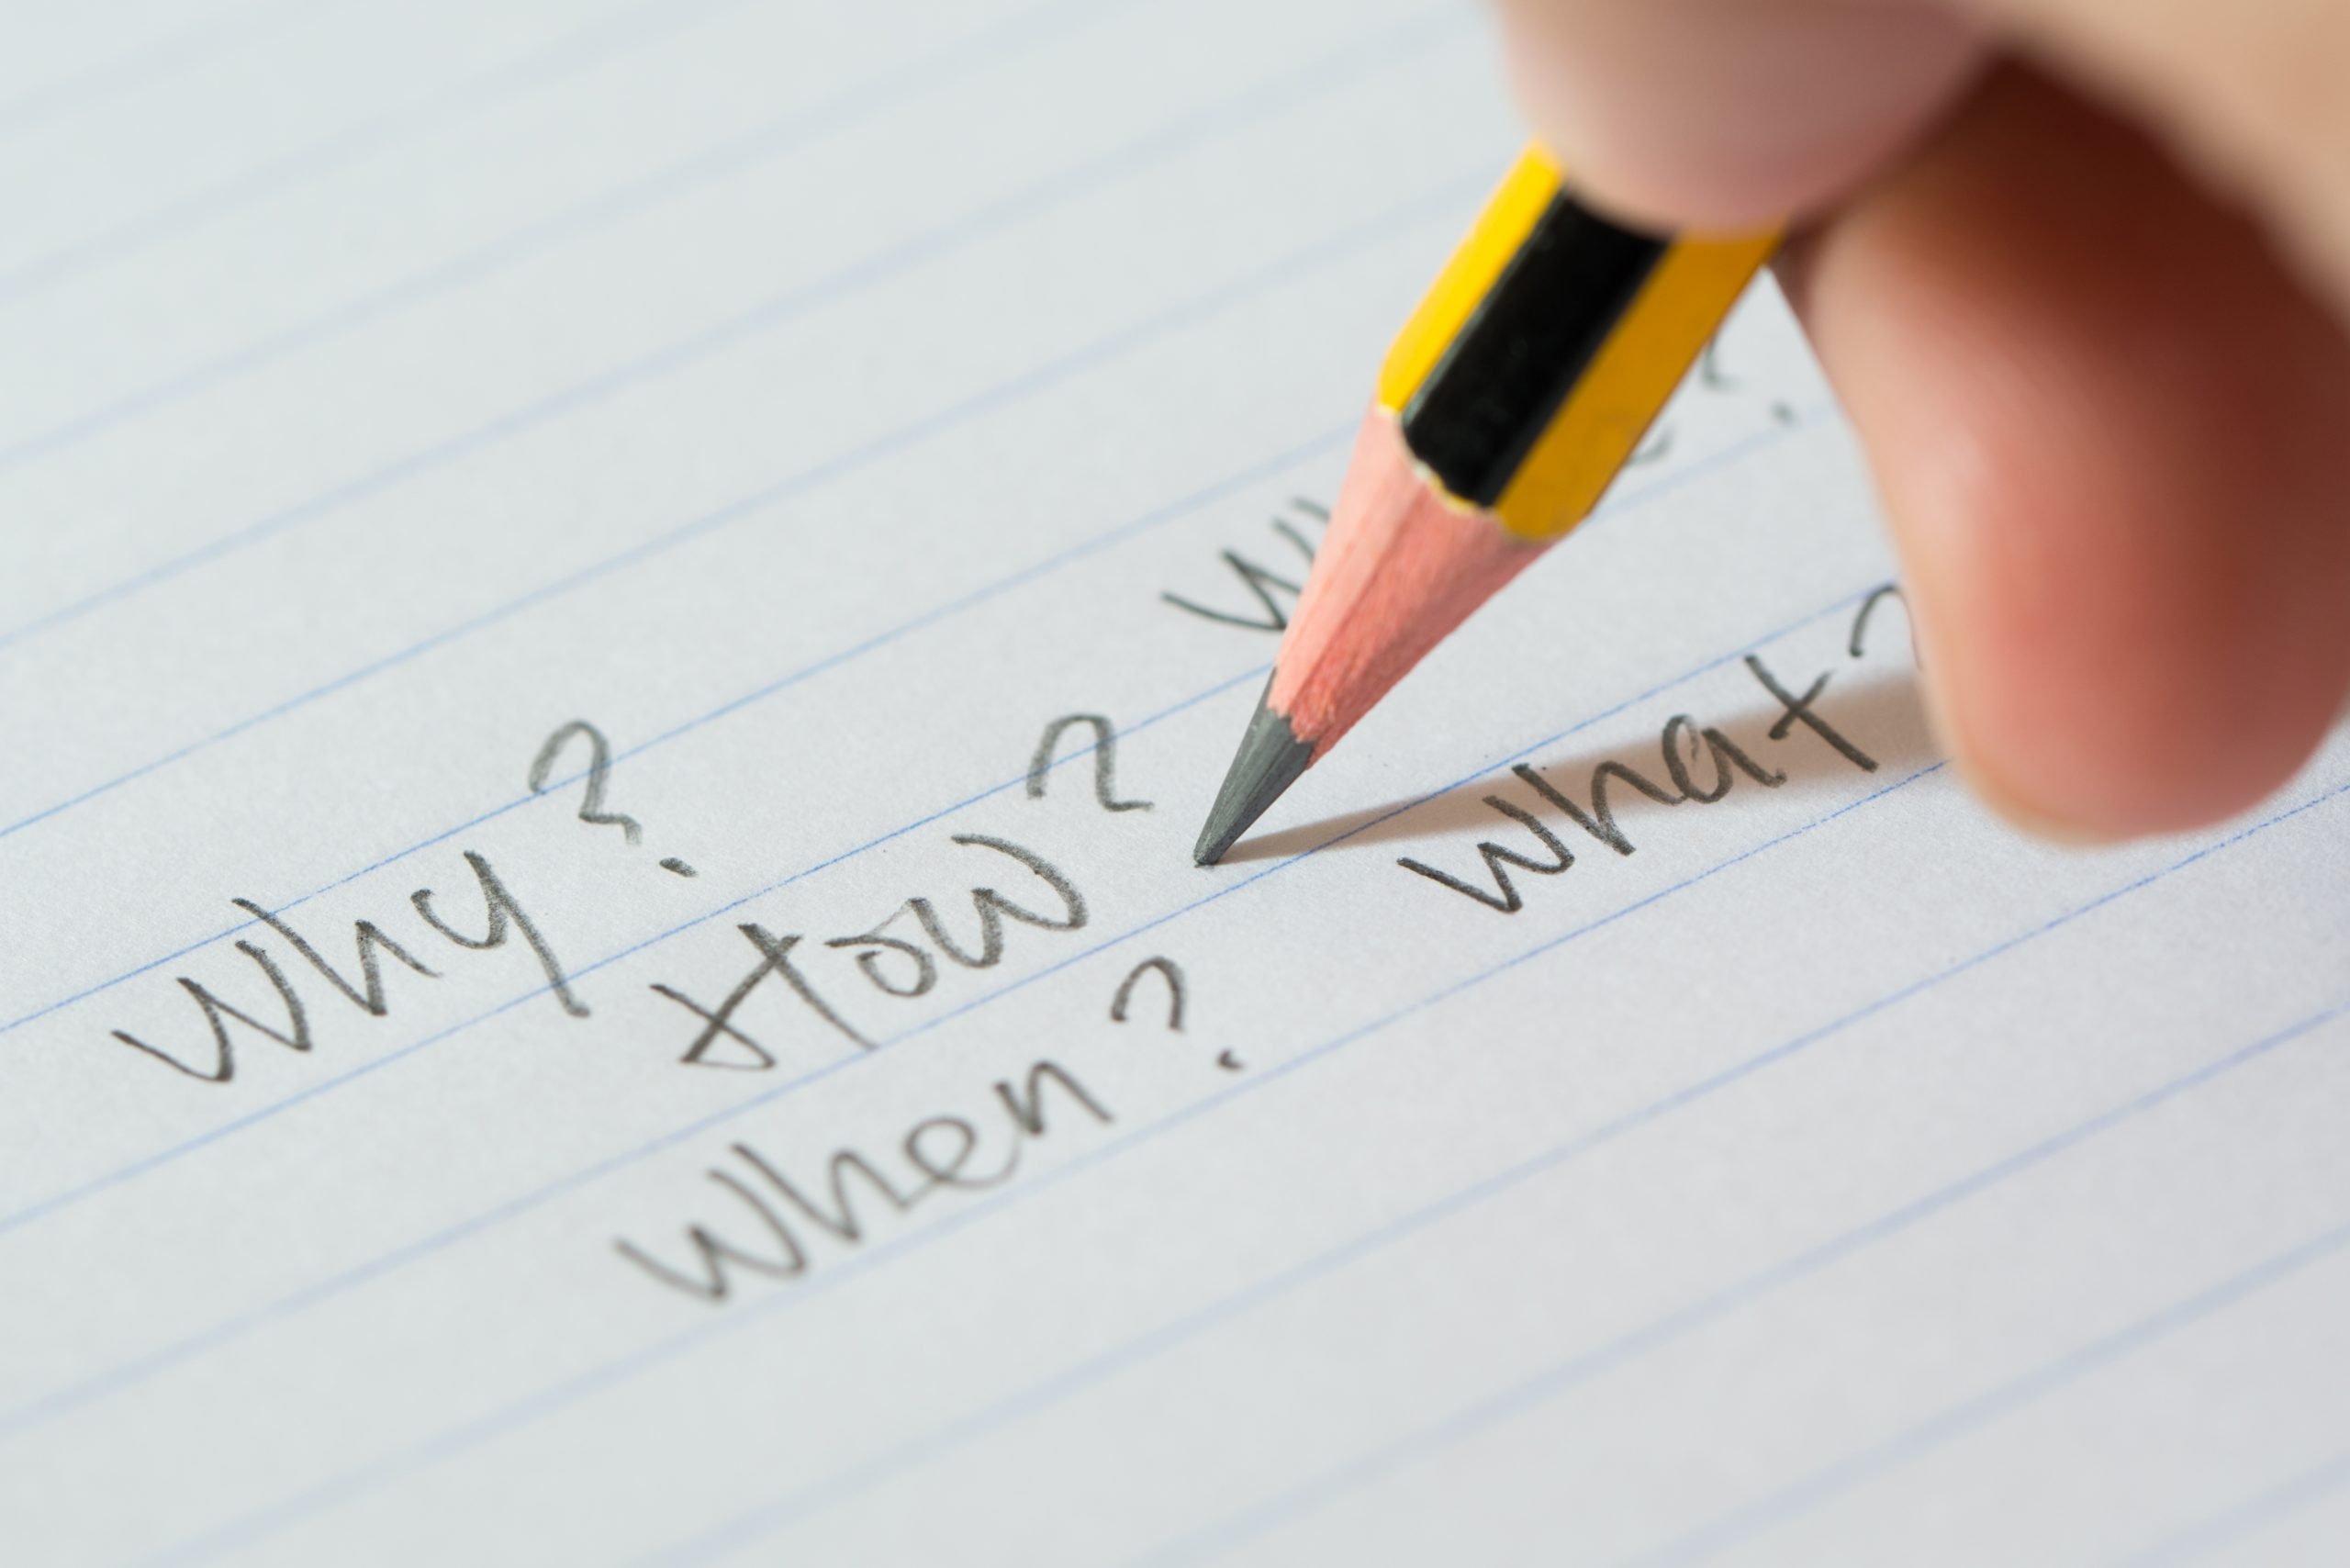 A person writing "Why?", "How?", and "When" in pencil on a piece of paper